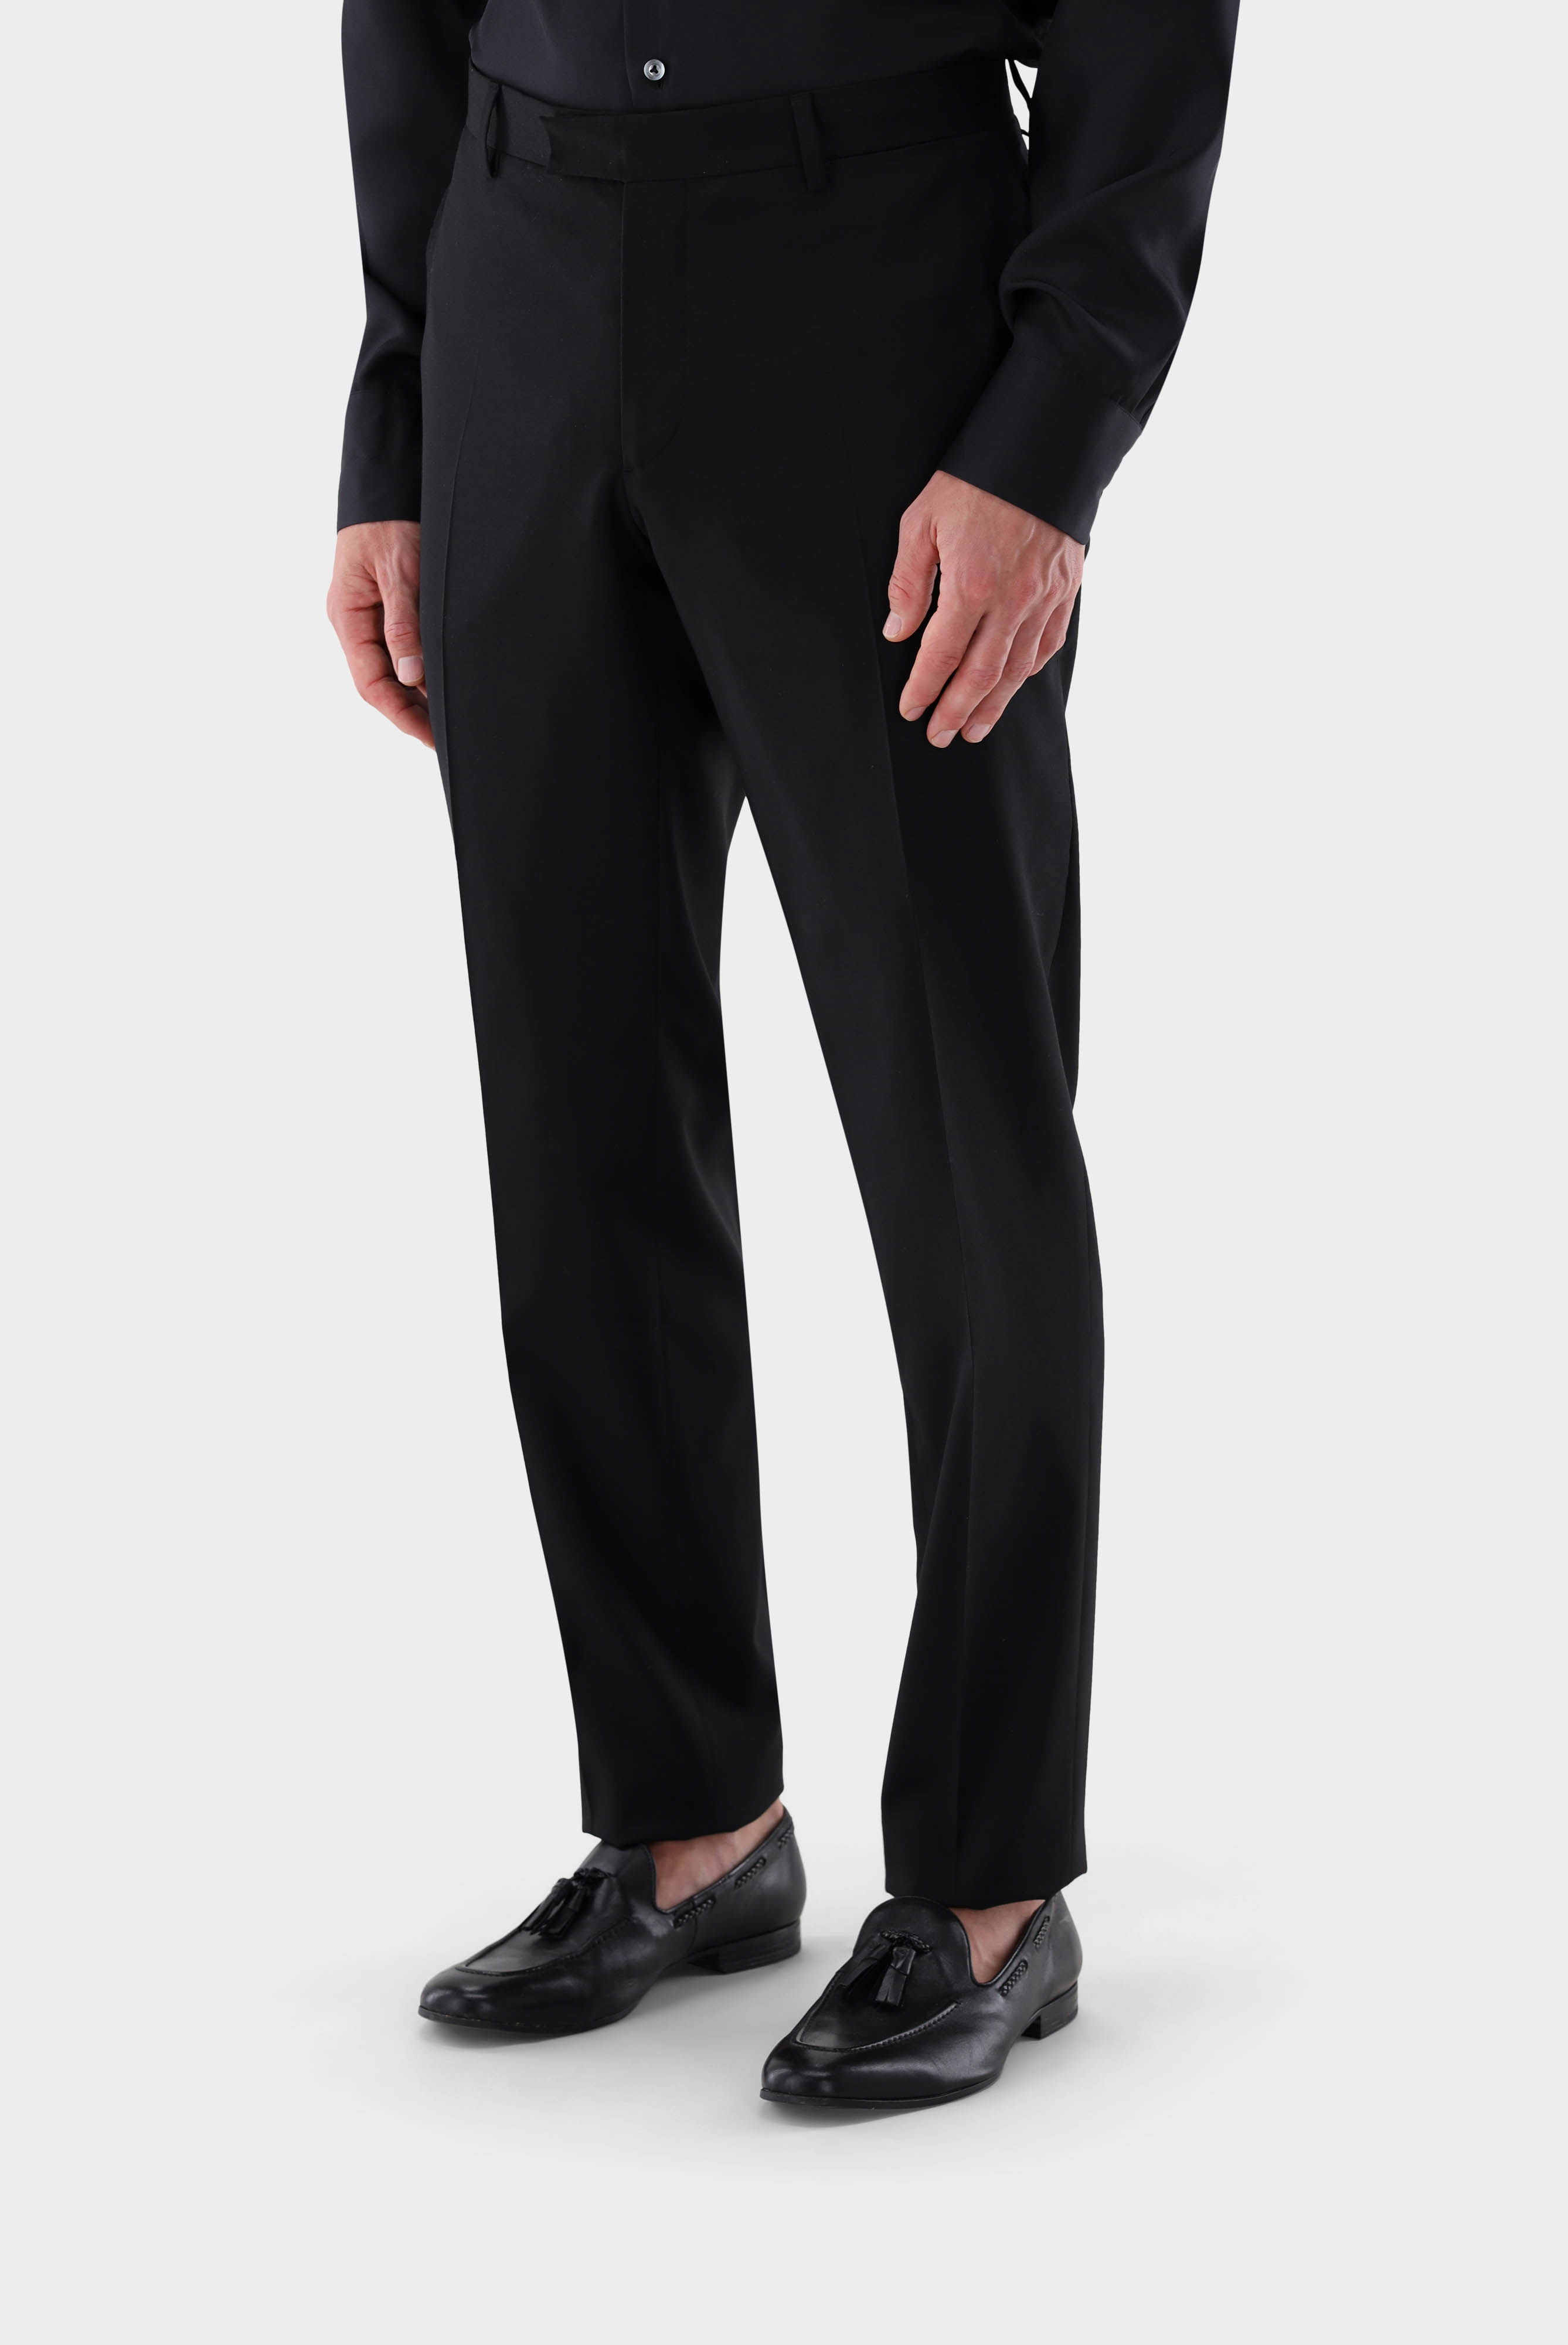 Jeans & Trousers+Wool Trousers Slim Fit+20.7880.16.H01010.099.94